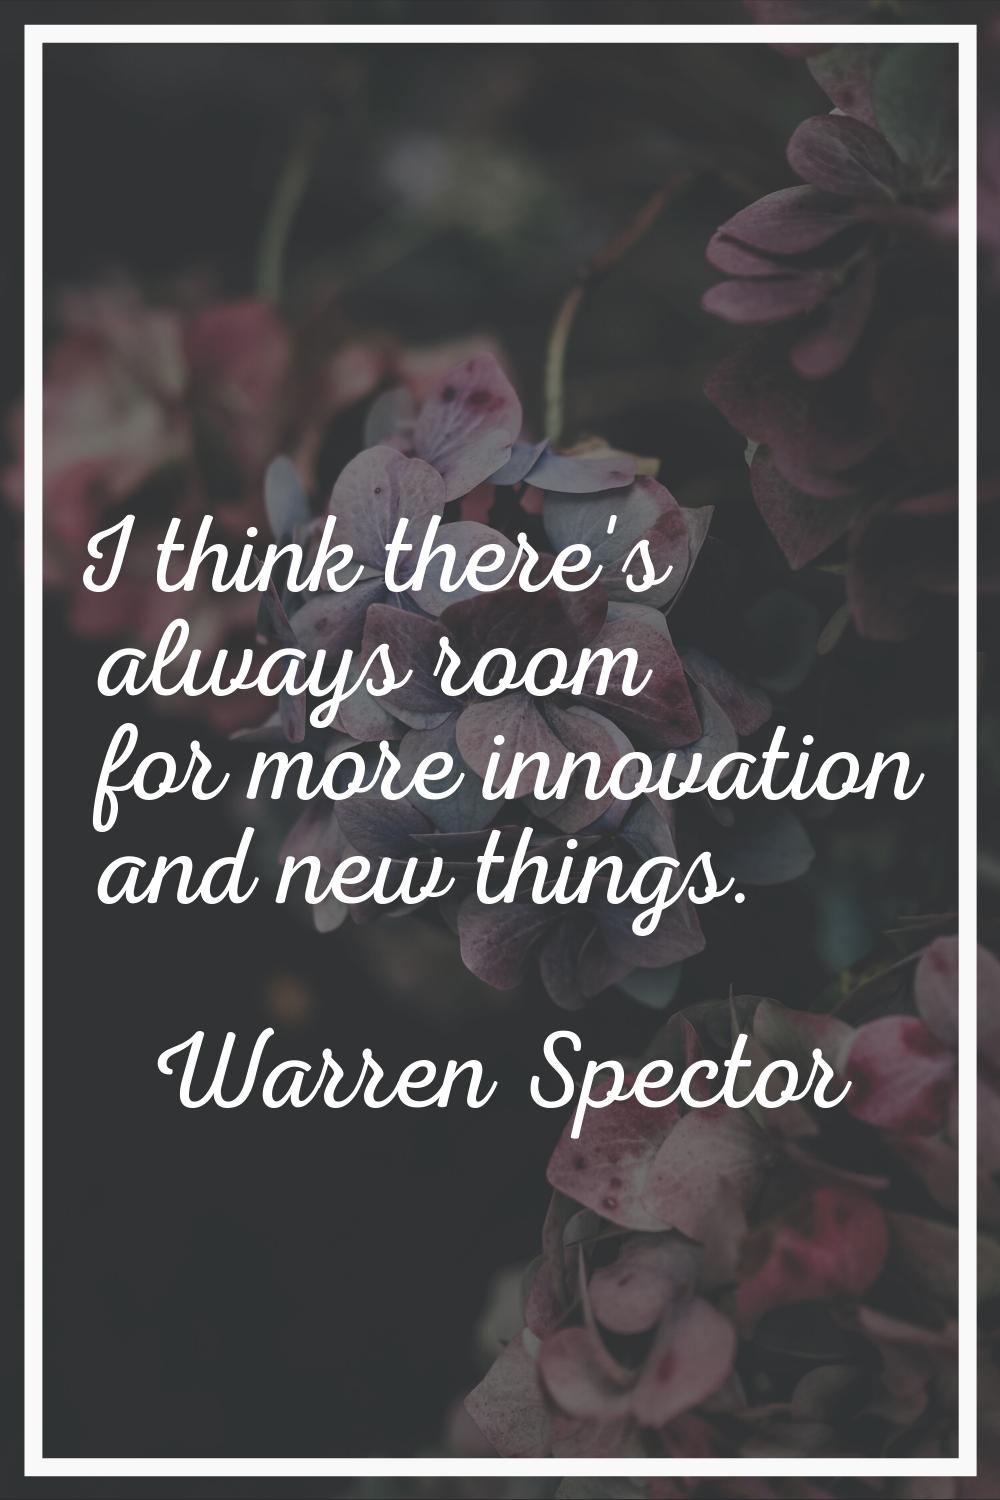 I think there's always room for more innovation and new things.